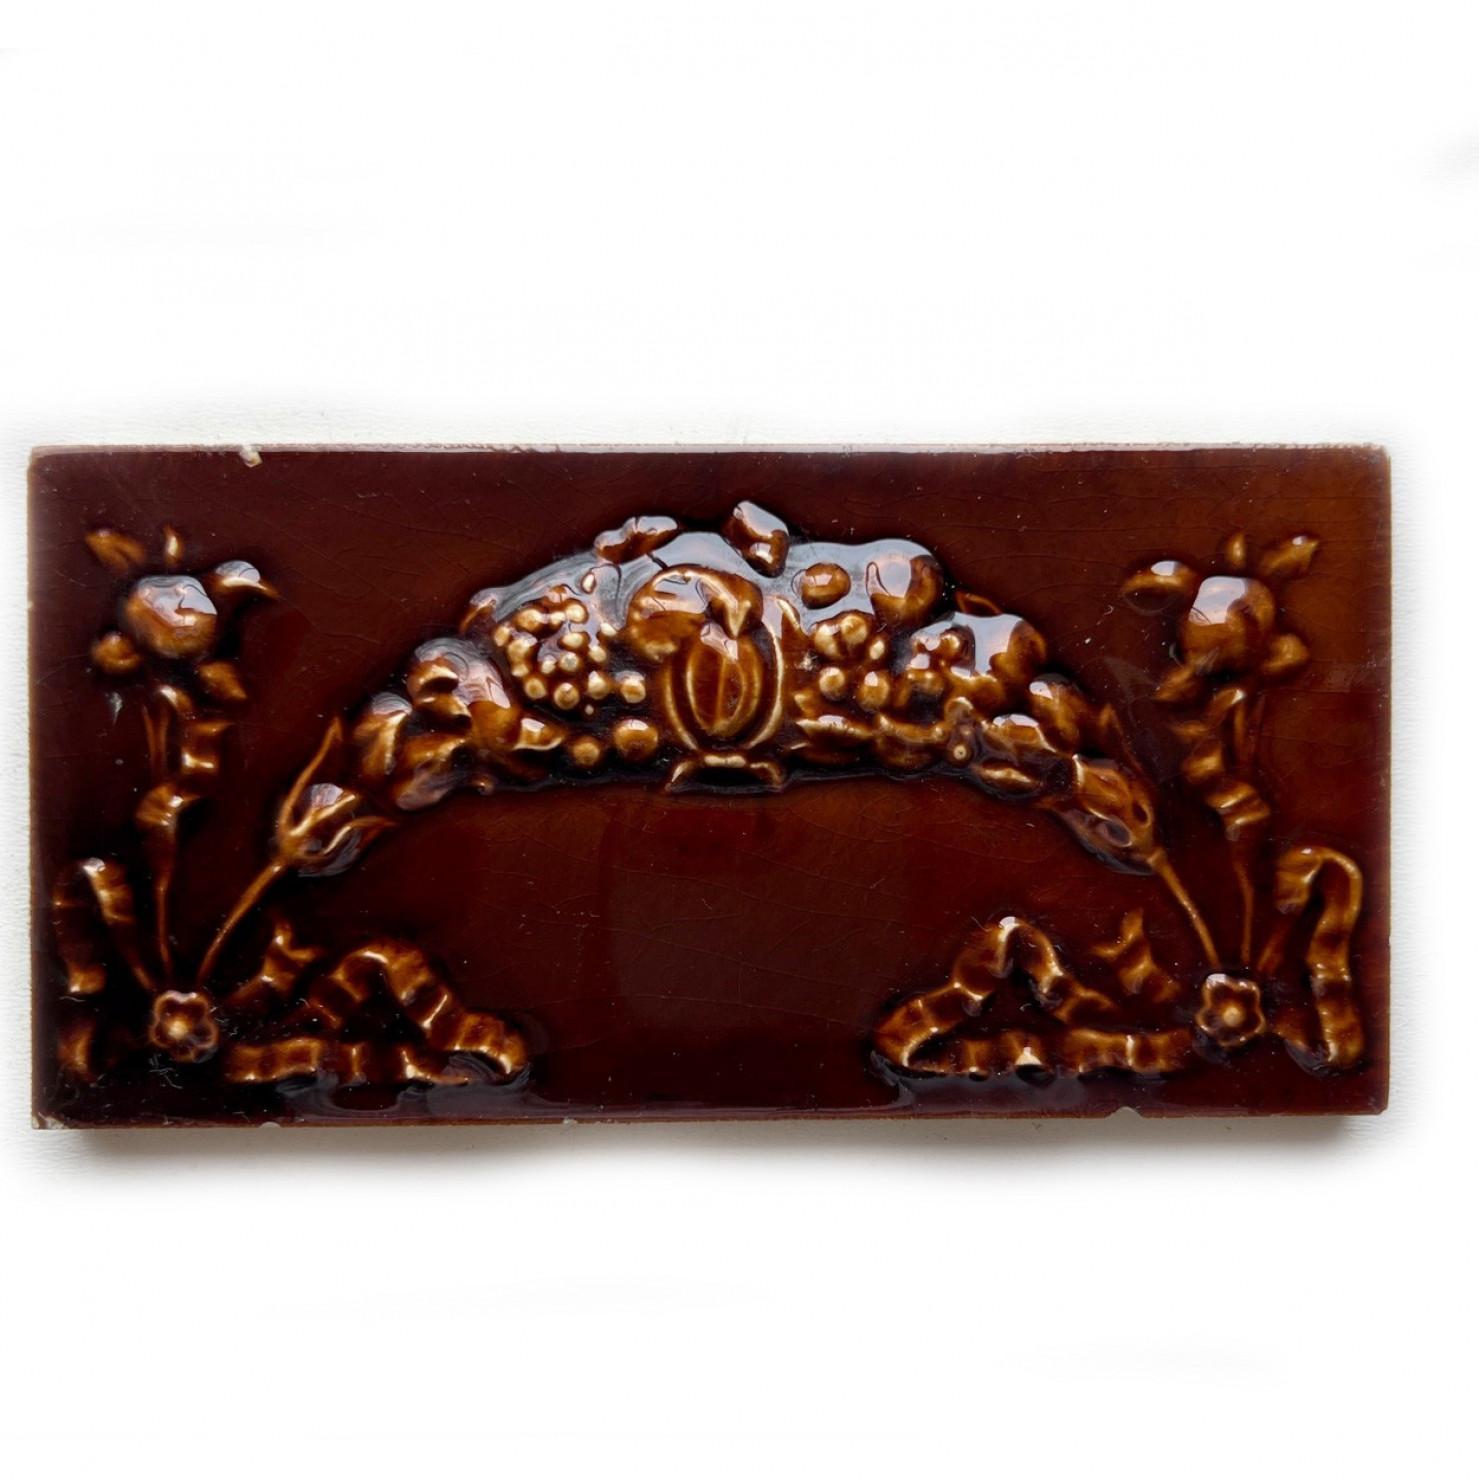 Beautiful Art Nouveau border tiles, with an image of a guirlande in relief. The gorgeous red-brown color is glazed. Manufactured around 1930 by, Societé Morialmé, Belgium.

The dimensions per tile are 2.95 inch (7,5 cm) × 5.9 inch (15 cm).

Please